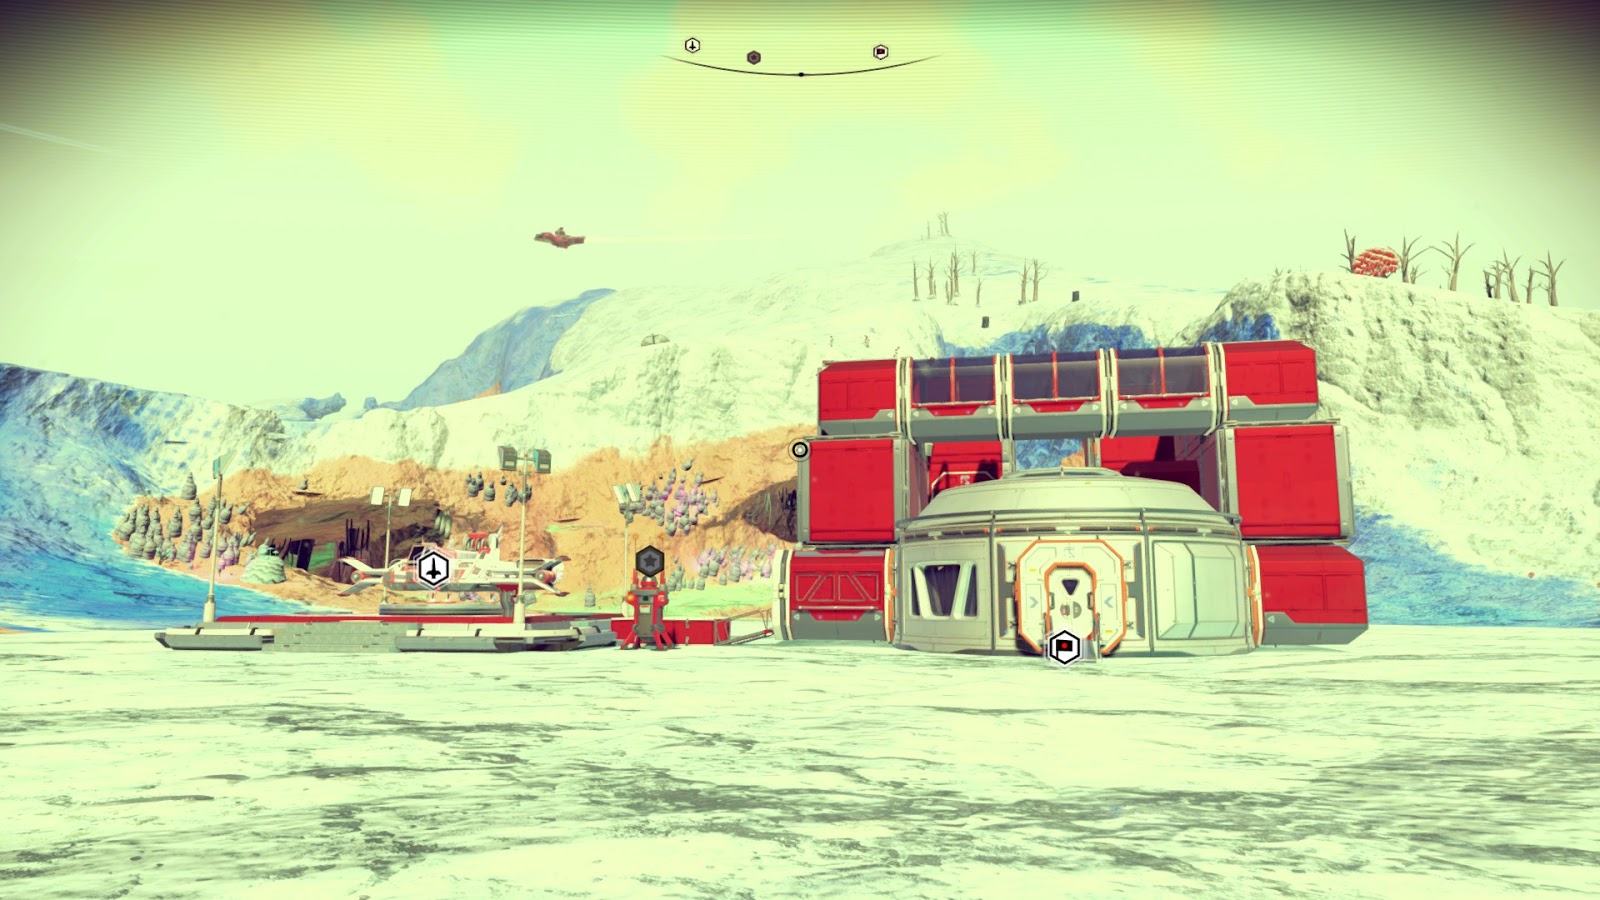 10 Cool Player Bases From No Man’s Sky’s Update